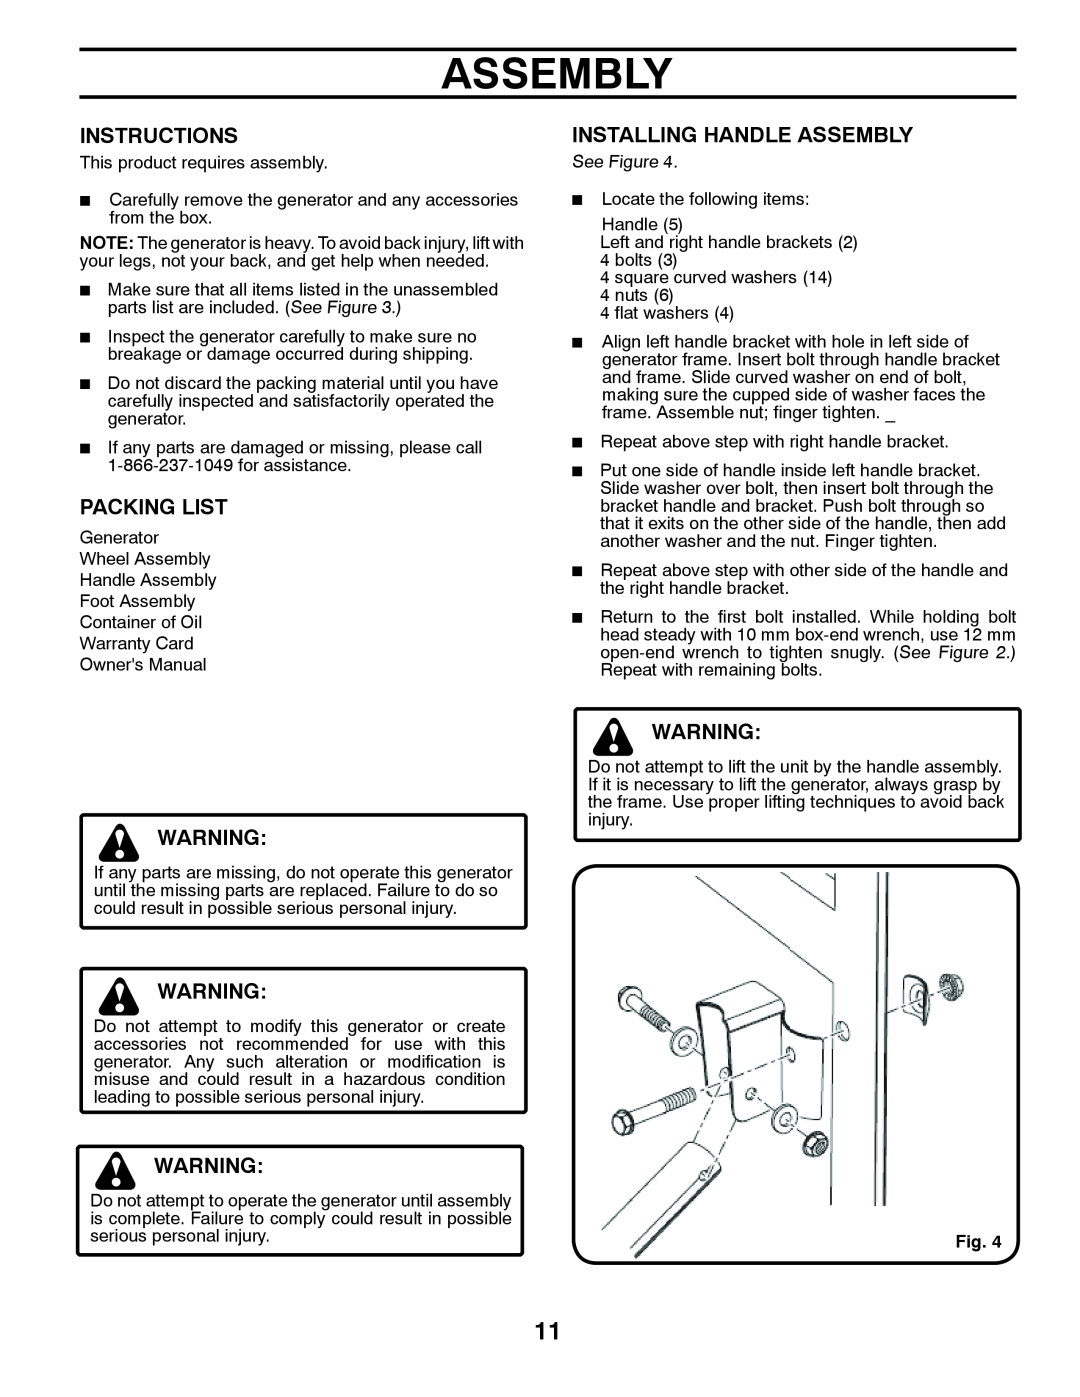 Poulan 420077 owner manual Instructions, Packing List, Installing Handle Assembly 